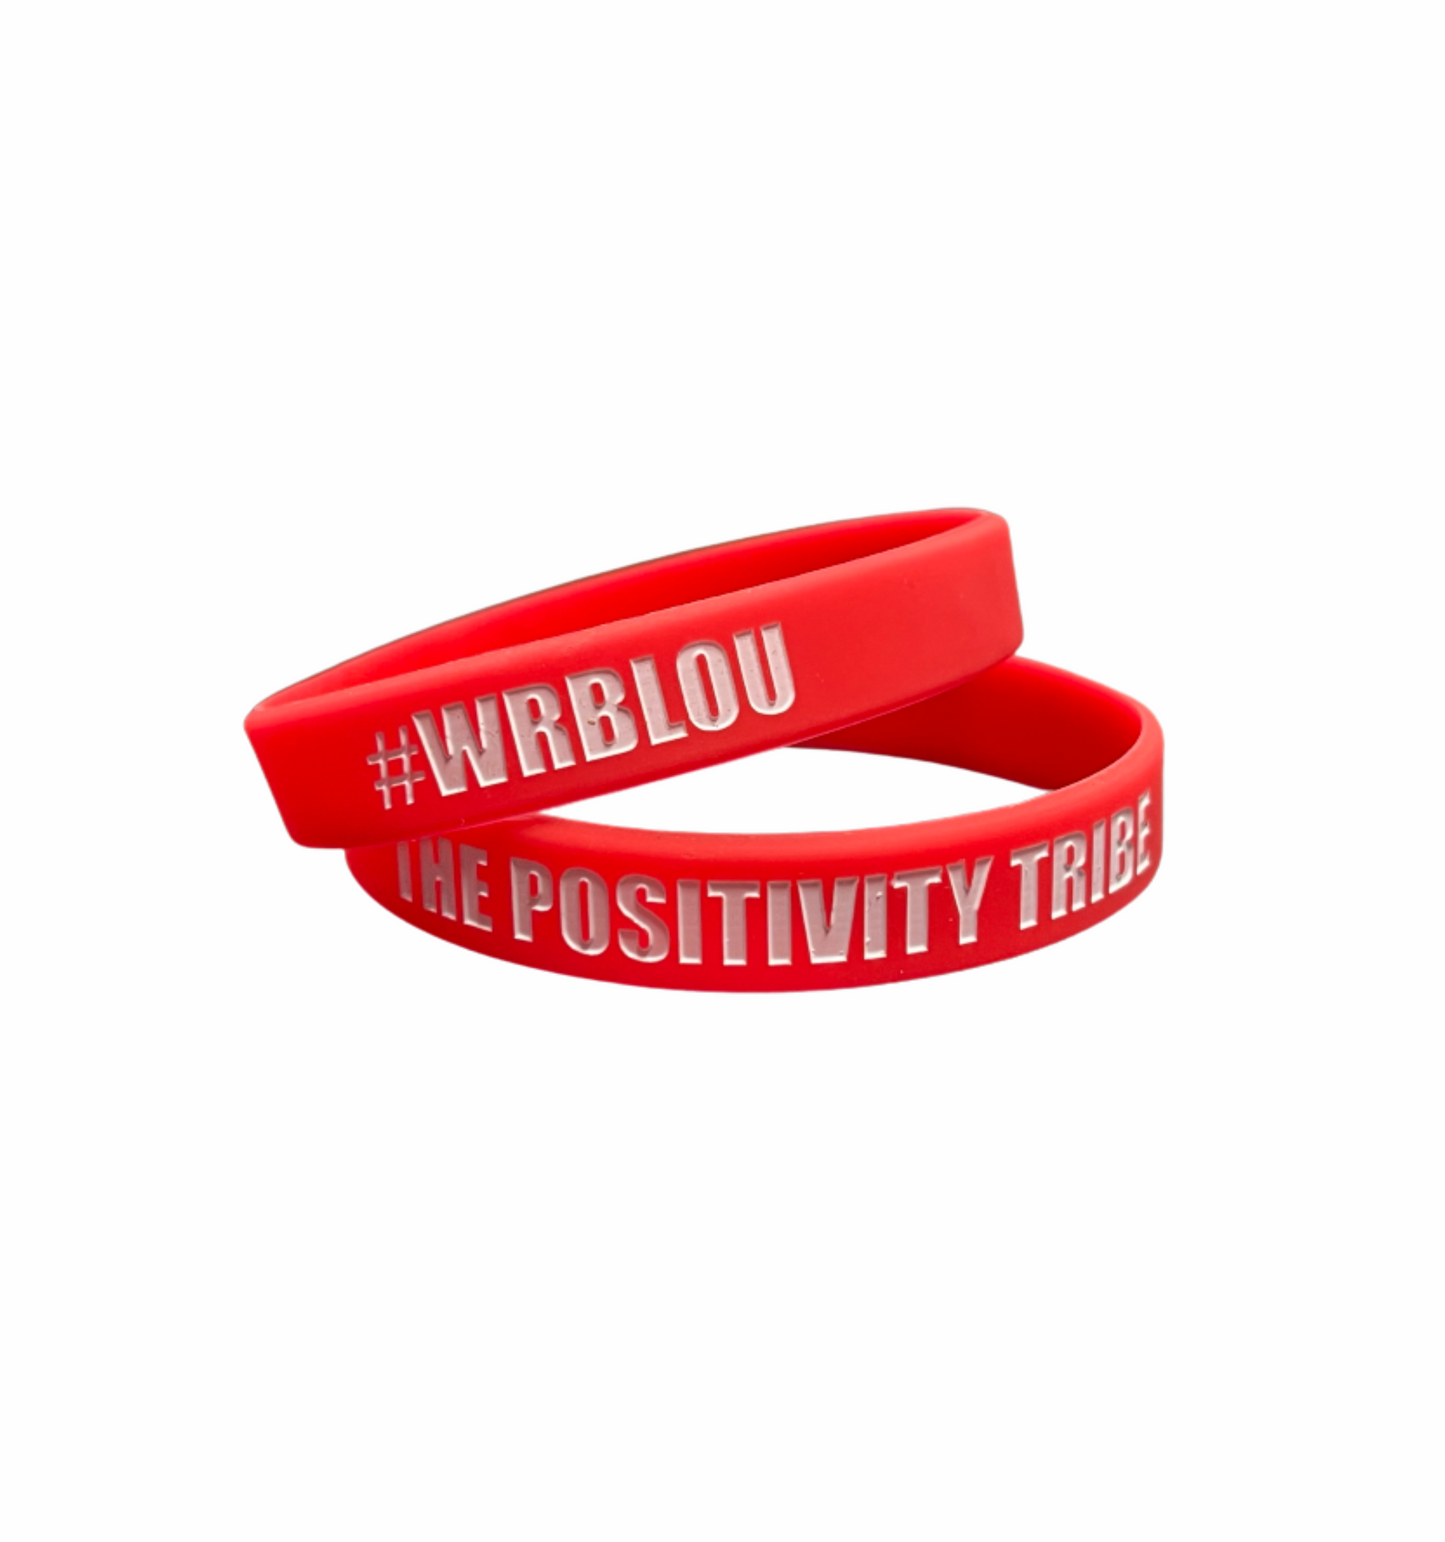 The Positivity Tribe Silicone Wristband